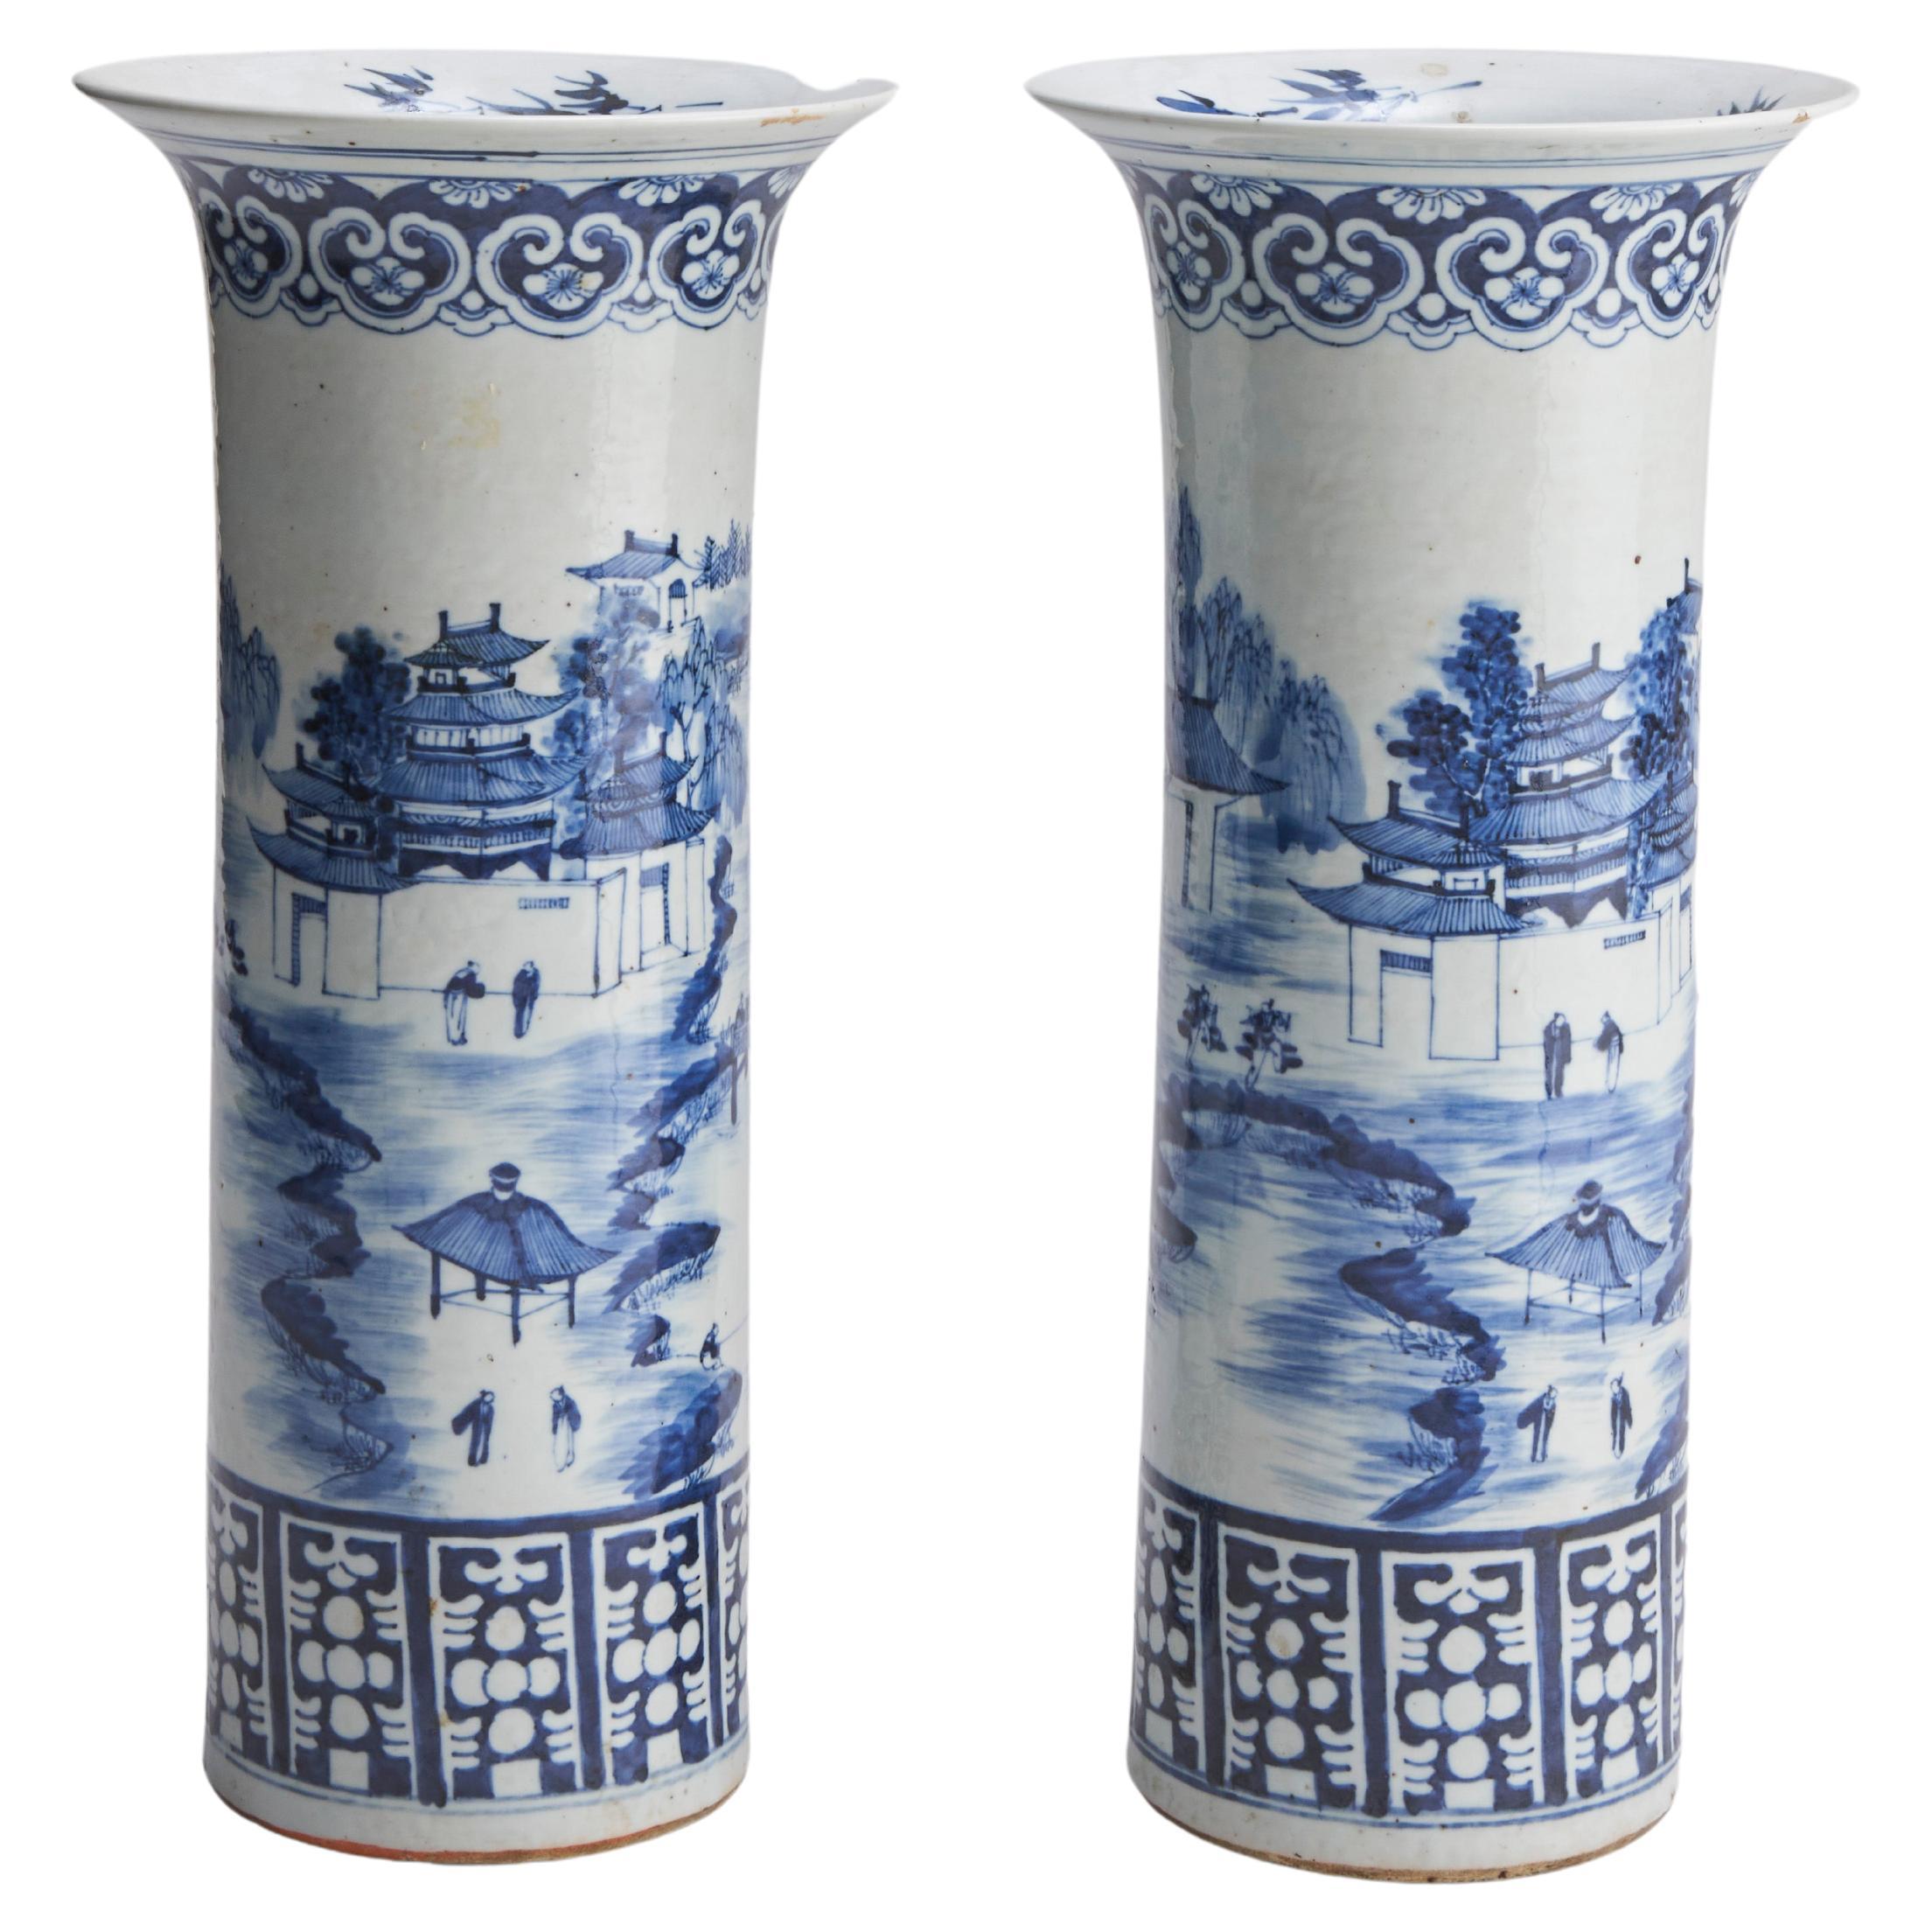 A large (44cm in height) pair of blue and white sleeve vases 